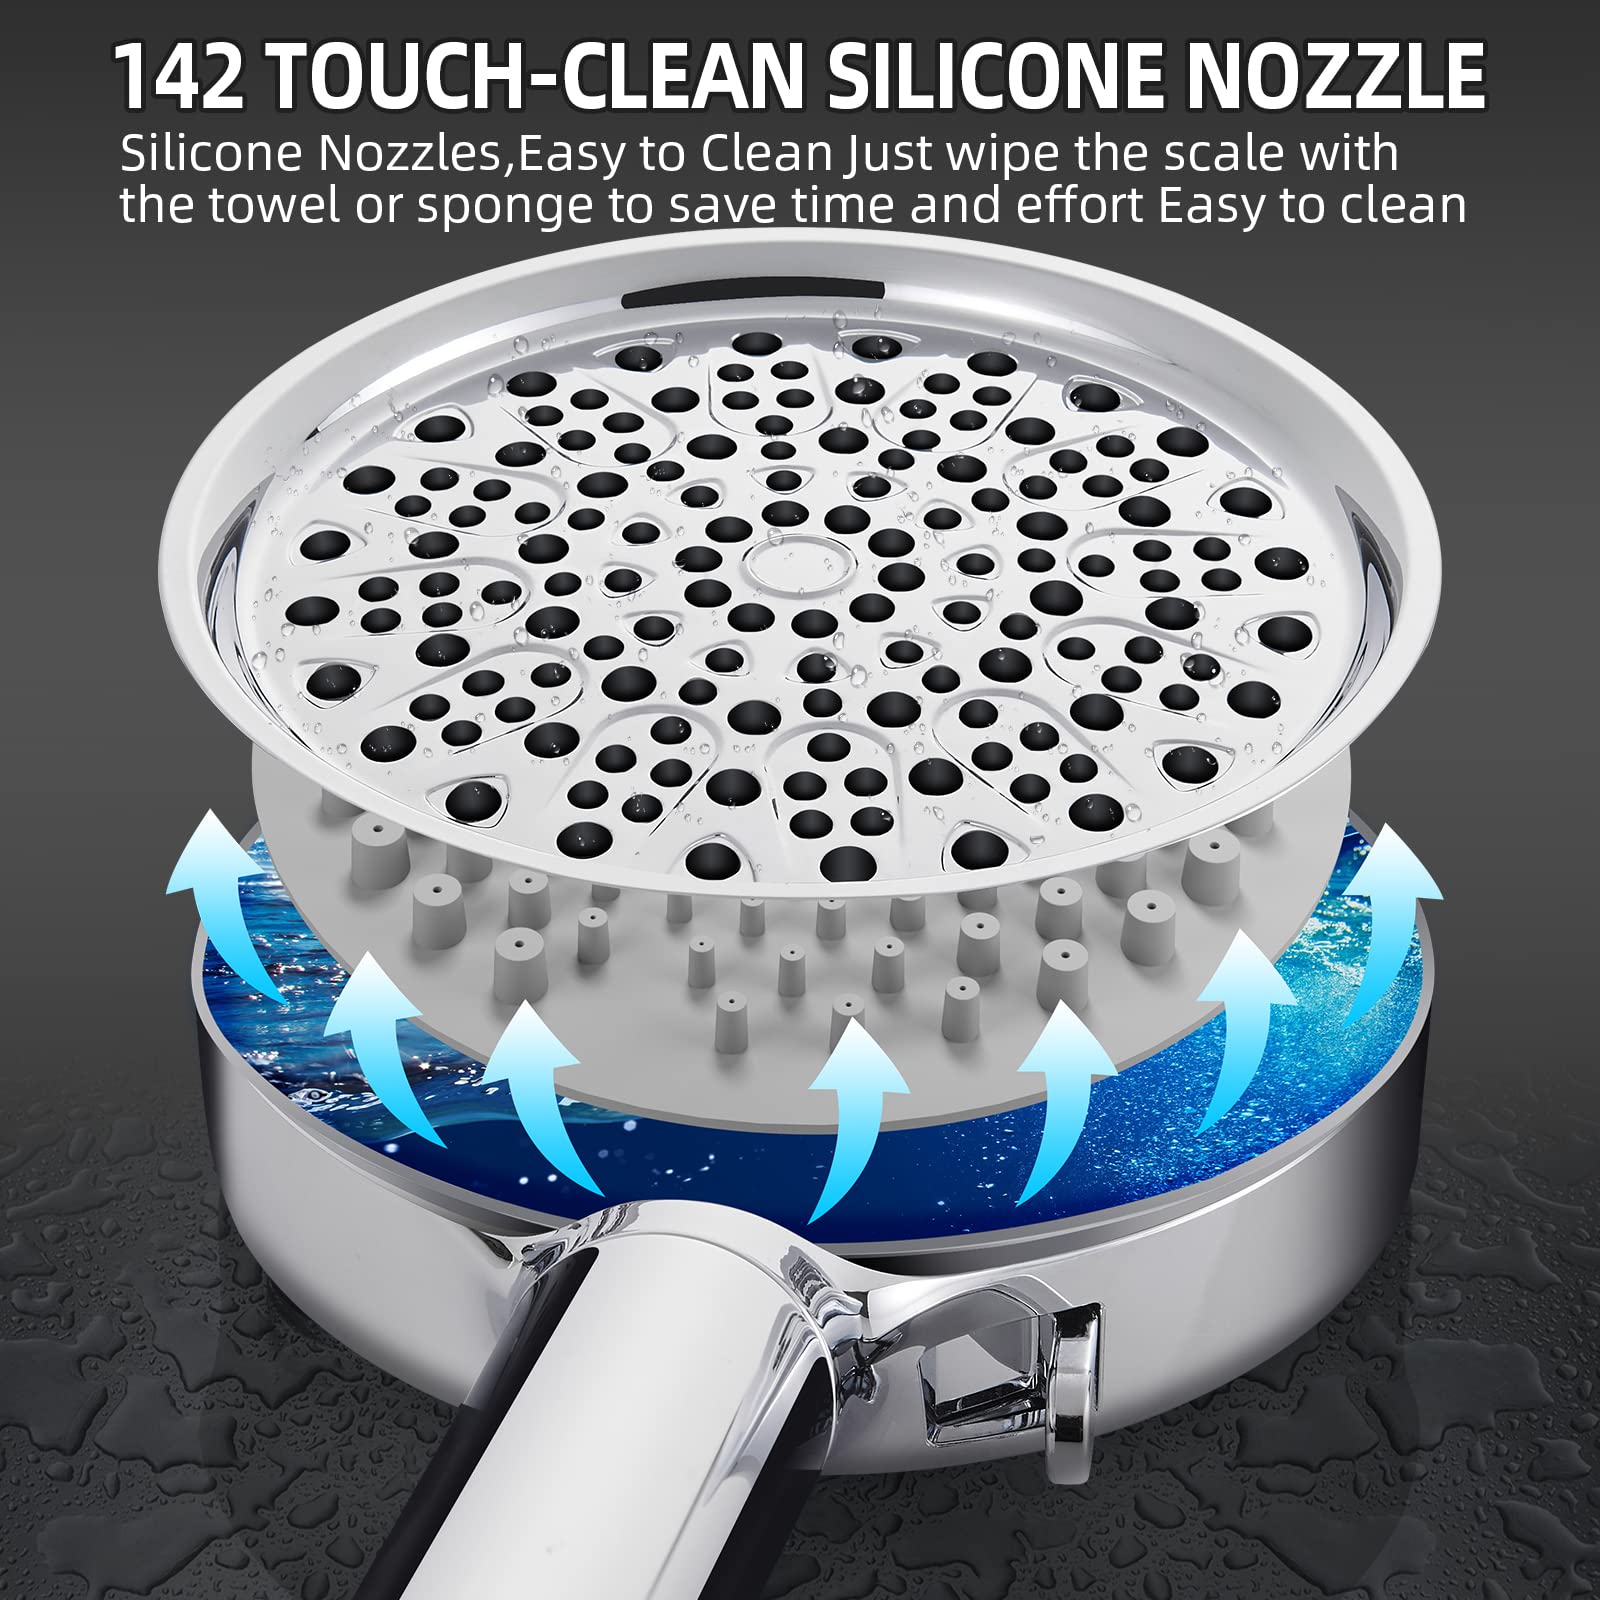 Cobbe Filtered Shower Head with Handheld, High Pressure 6 Spray Mode Showerhead with Filters, Water Softener Filters Beads for Hard Water - Remove Chlorine - Reduces Dry Itchy Skin, Chrome